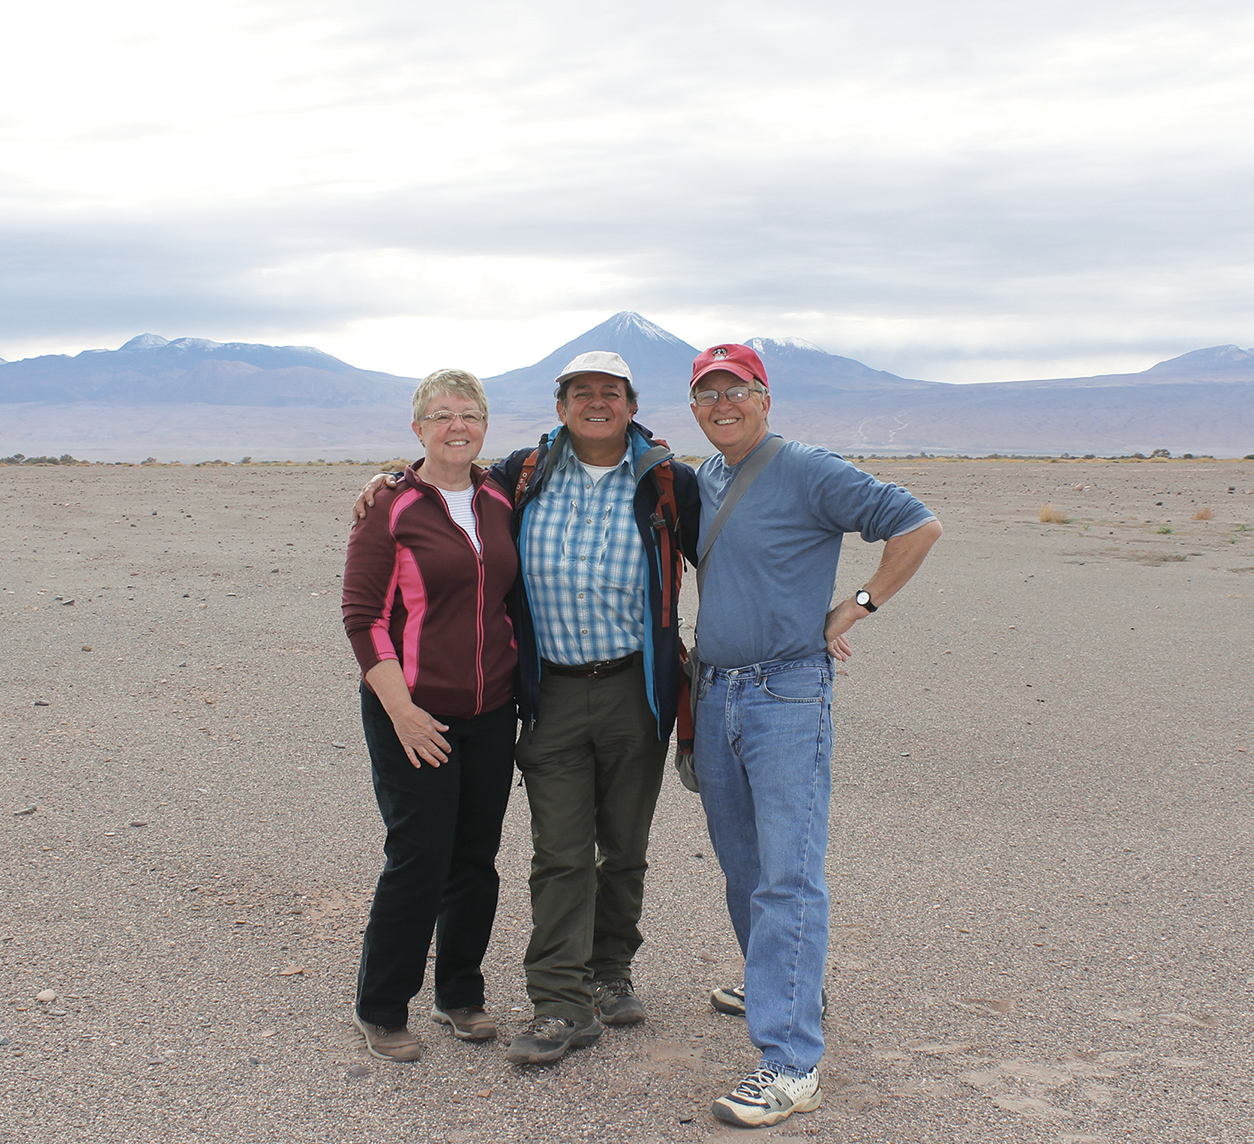 1 Carol, Luis Aracena, and Craig at a Pre-Columbian site near San Pedro de Atacama with the Andes Mountains in the background, 2017. 